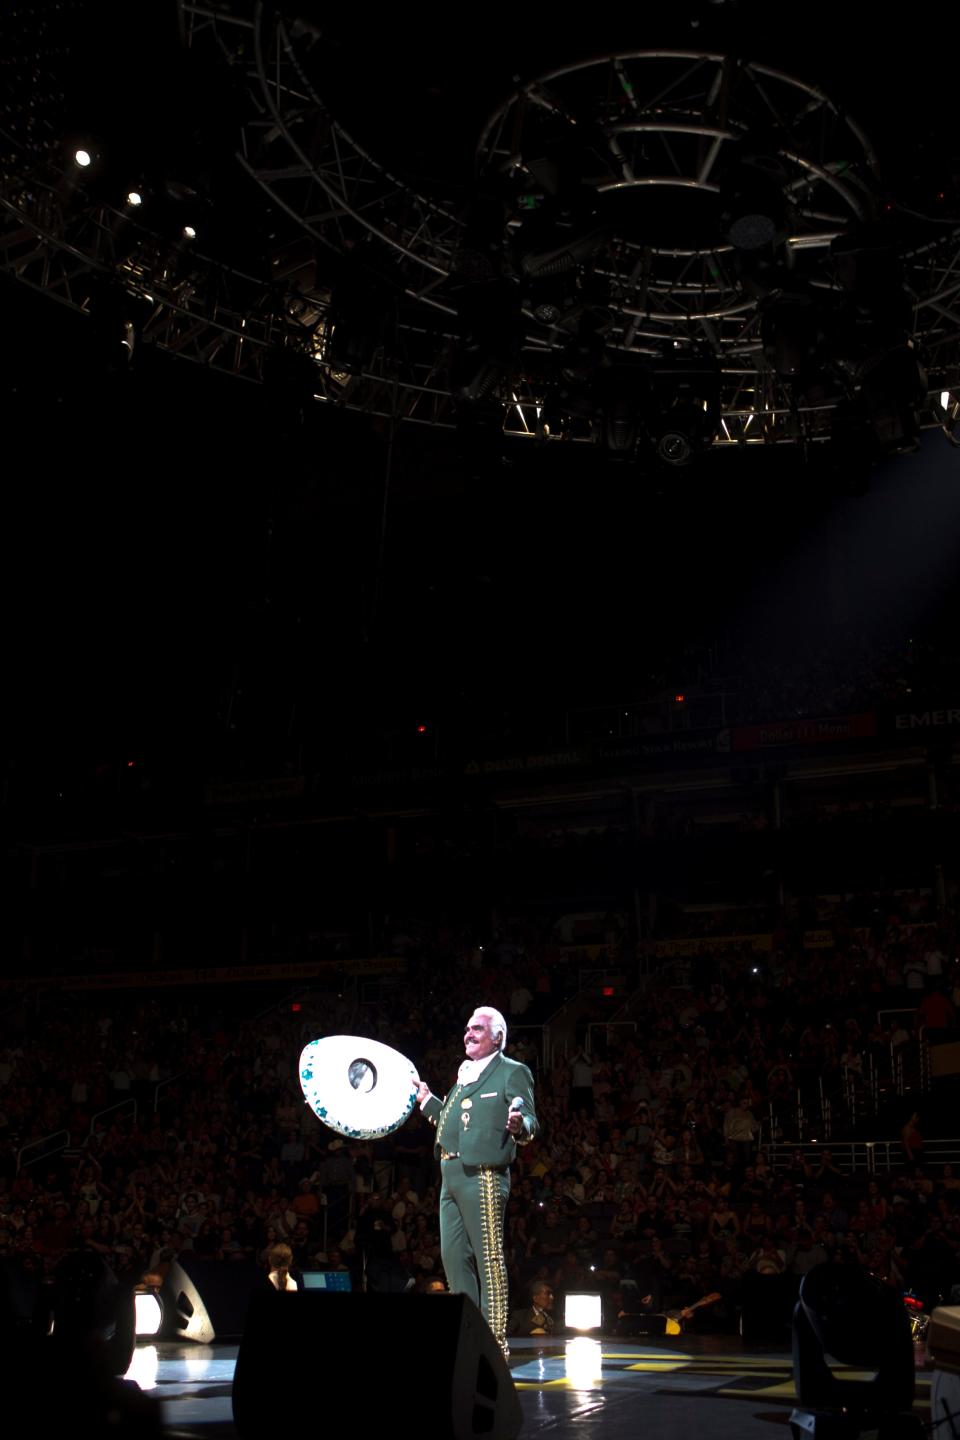 Iconic mariachi singer Vicente Fernández performs at US Airways Center on July 20, 2012, in what was reported to be his farewell tour.